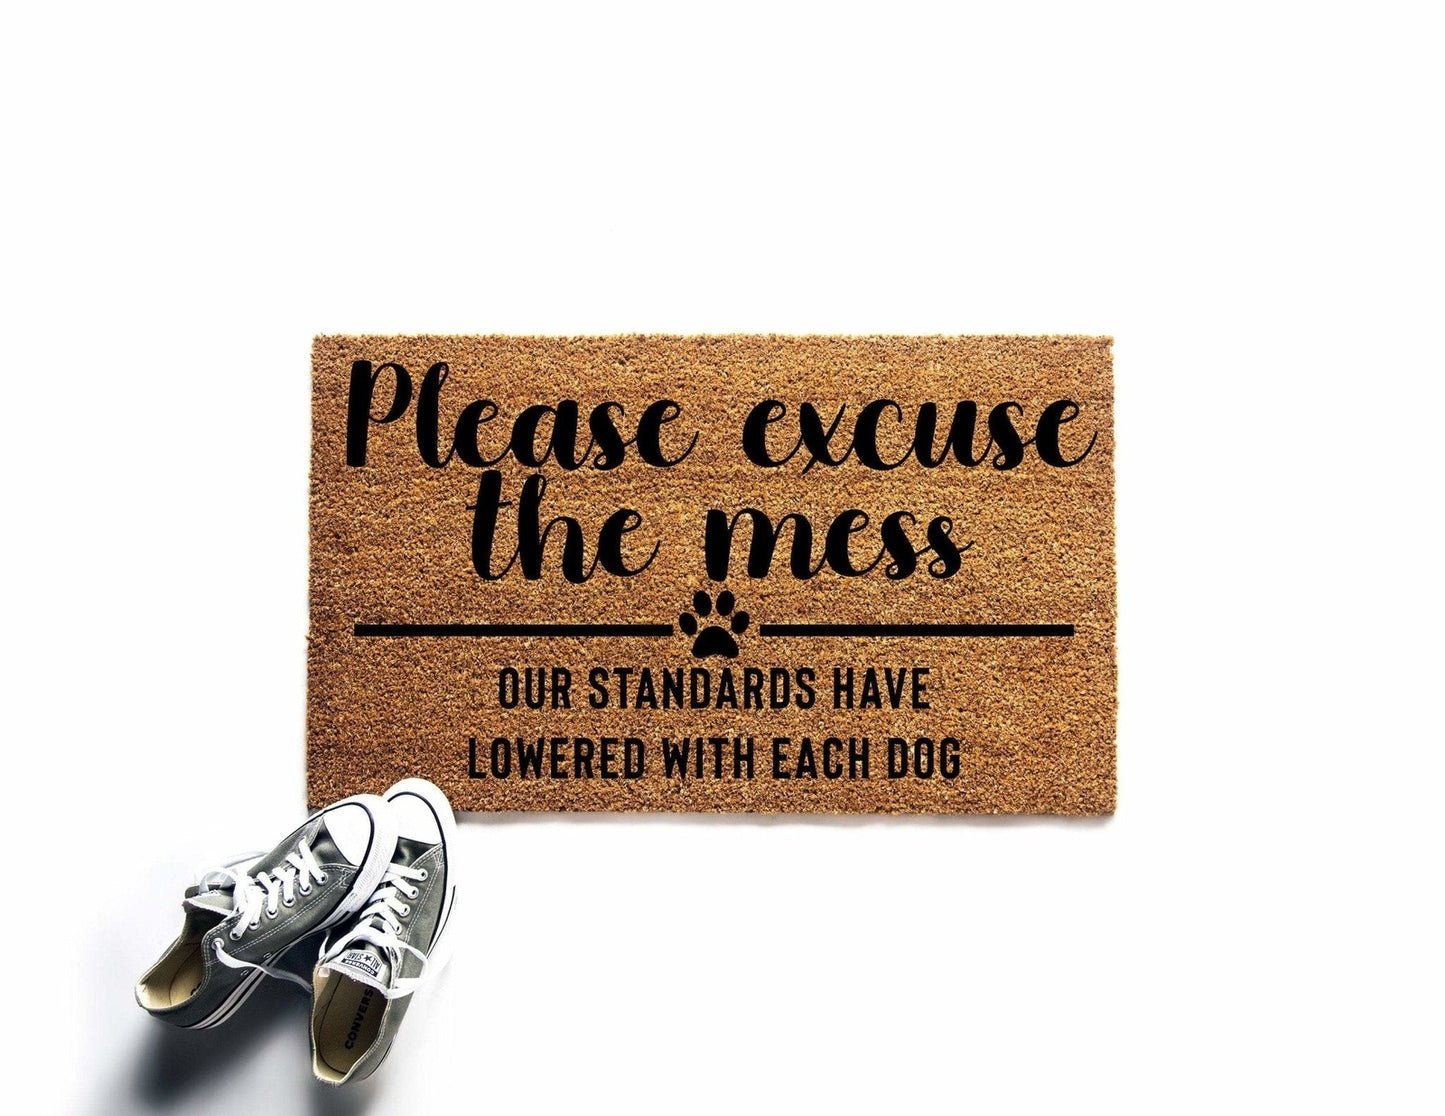 Please Excuse the Mess Funny Dog Doormat